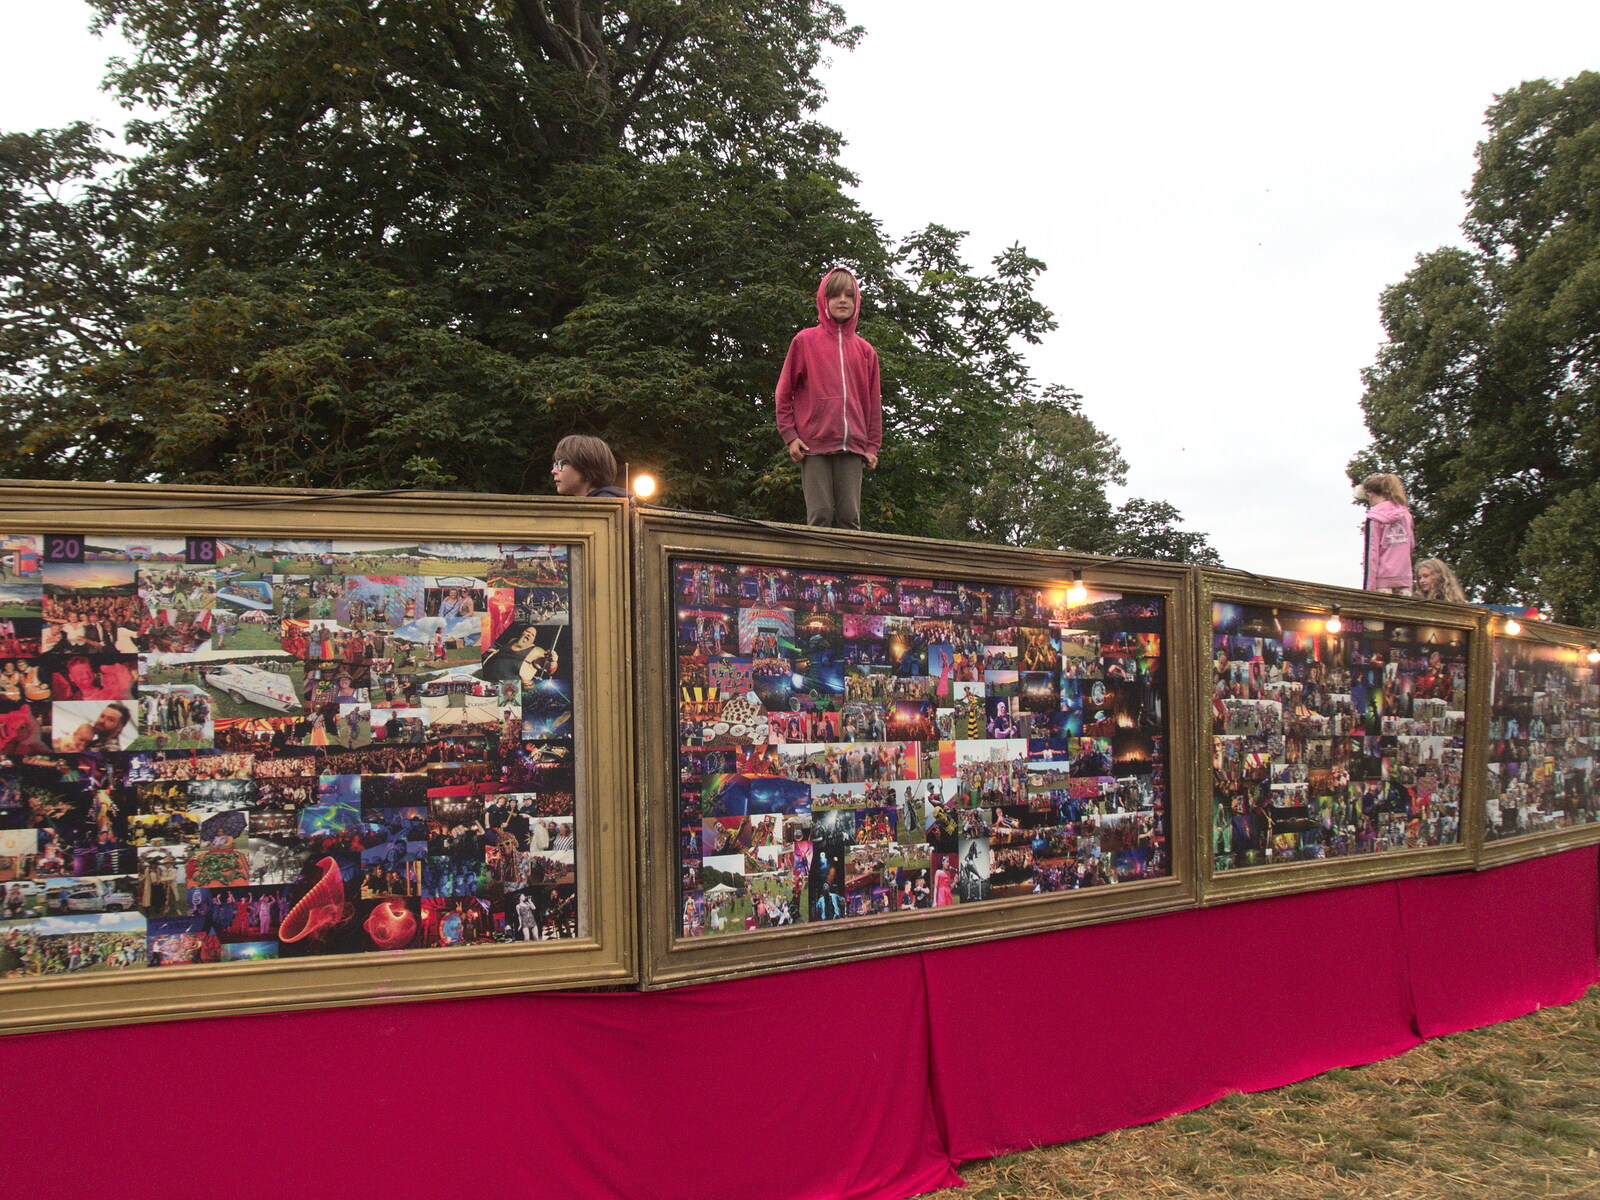 Harry's found the way in to the picture wall from Maui Waui Festival, Hill Farm, Gressenhall, Norfolk - 28th August 2021